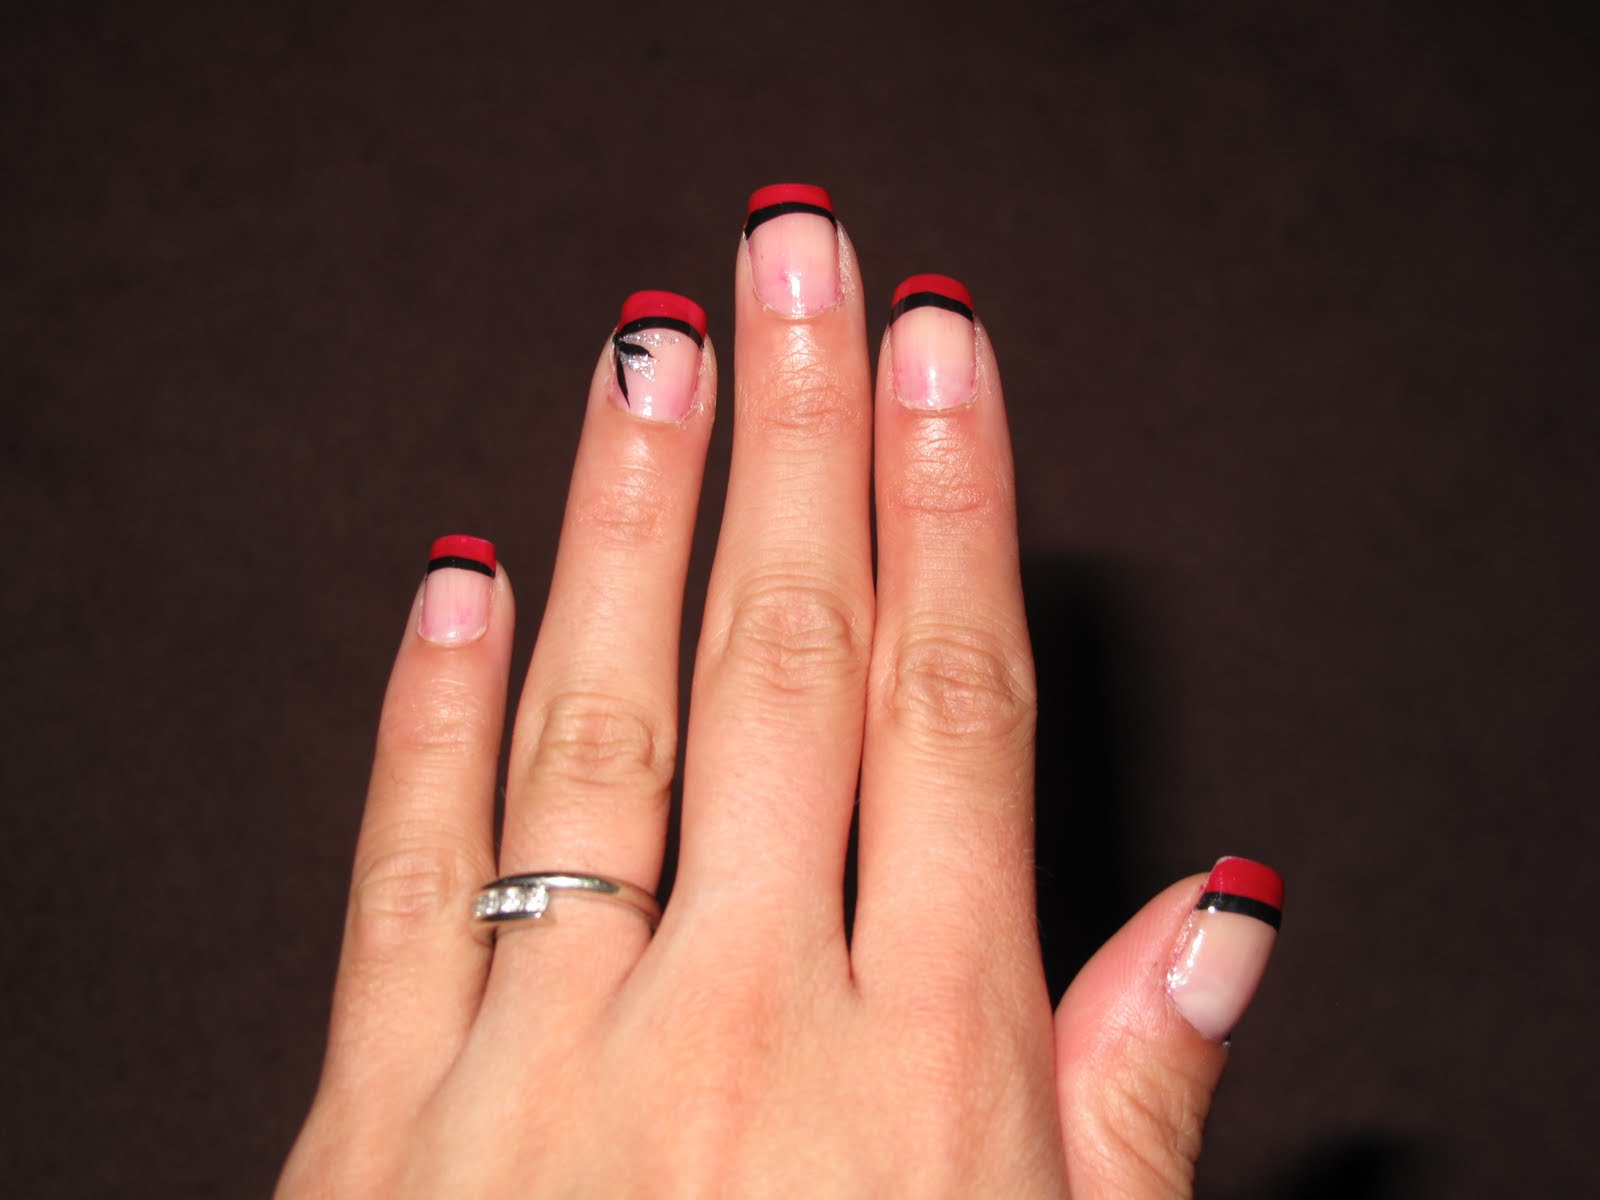 Black and Red Acrylic Nail Tip Designs - wide 6